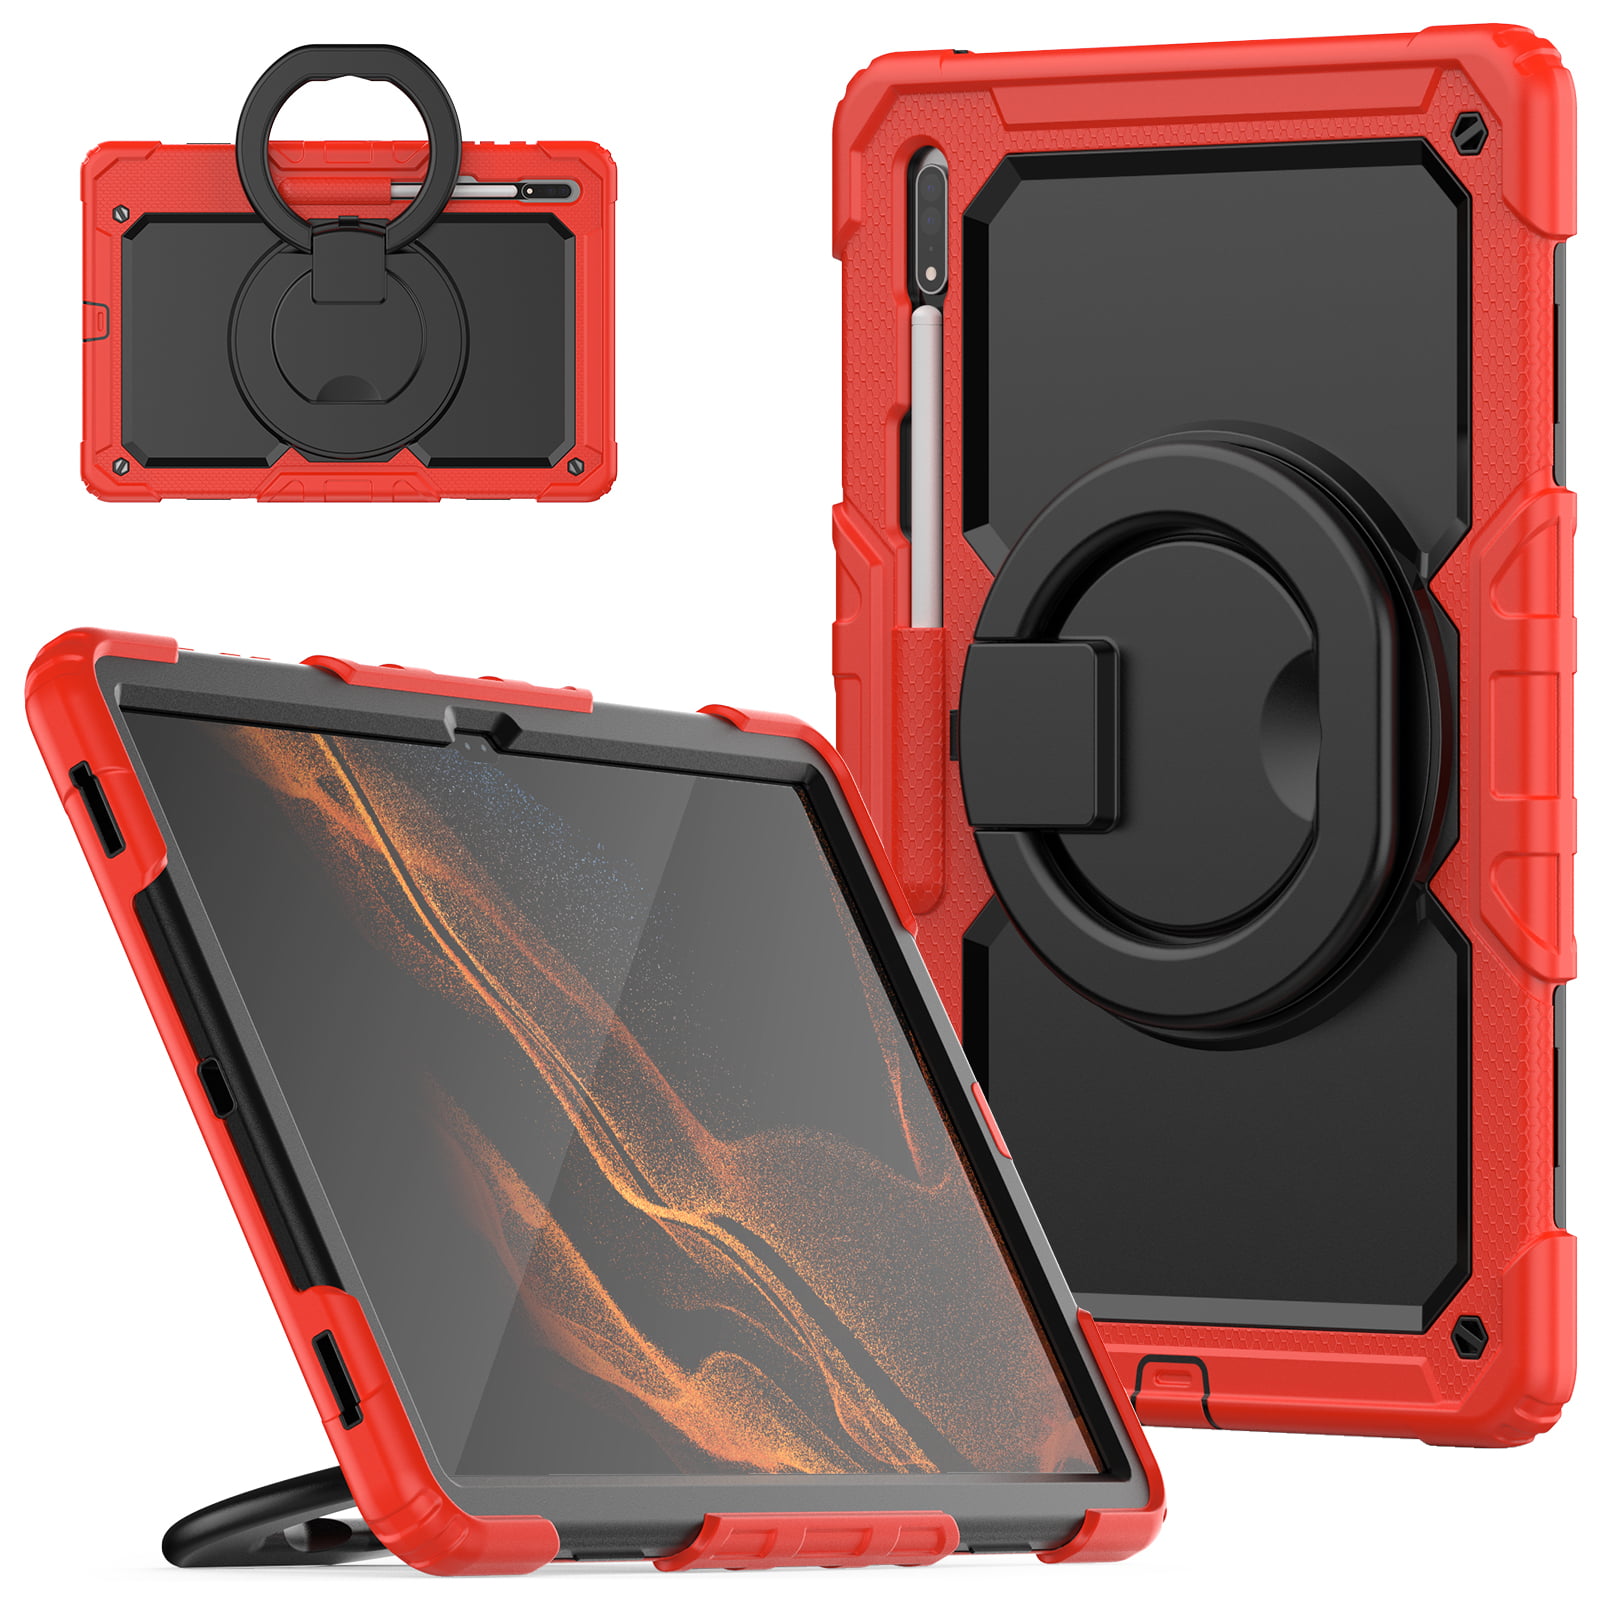 Samsung Tab S8 Ultra 14.6 inch Case with Screen Protector, Dteck 360  Rotating Handle Grip Stand Heavy Duty Rugged Shockproof Case with S Pen  Holder for Samsung Galaxy Tab S8 Ultra, Red+Black -